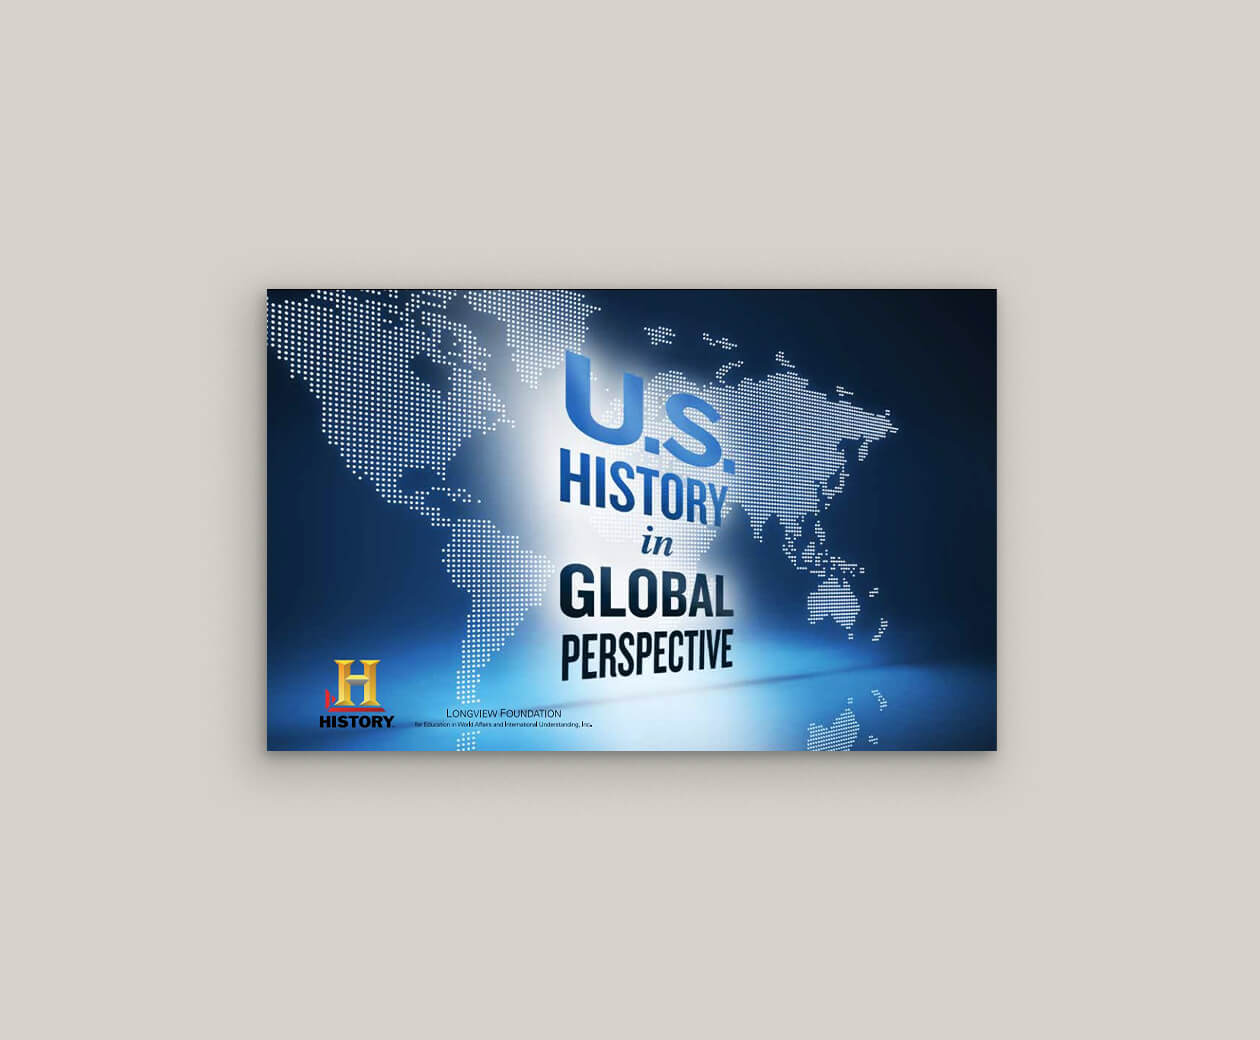 U.S. History in Global Perspective